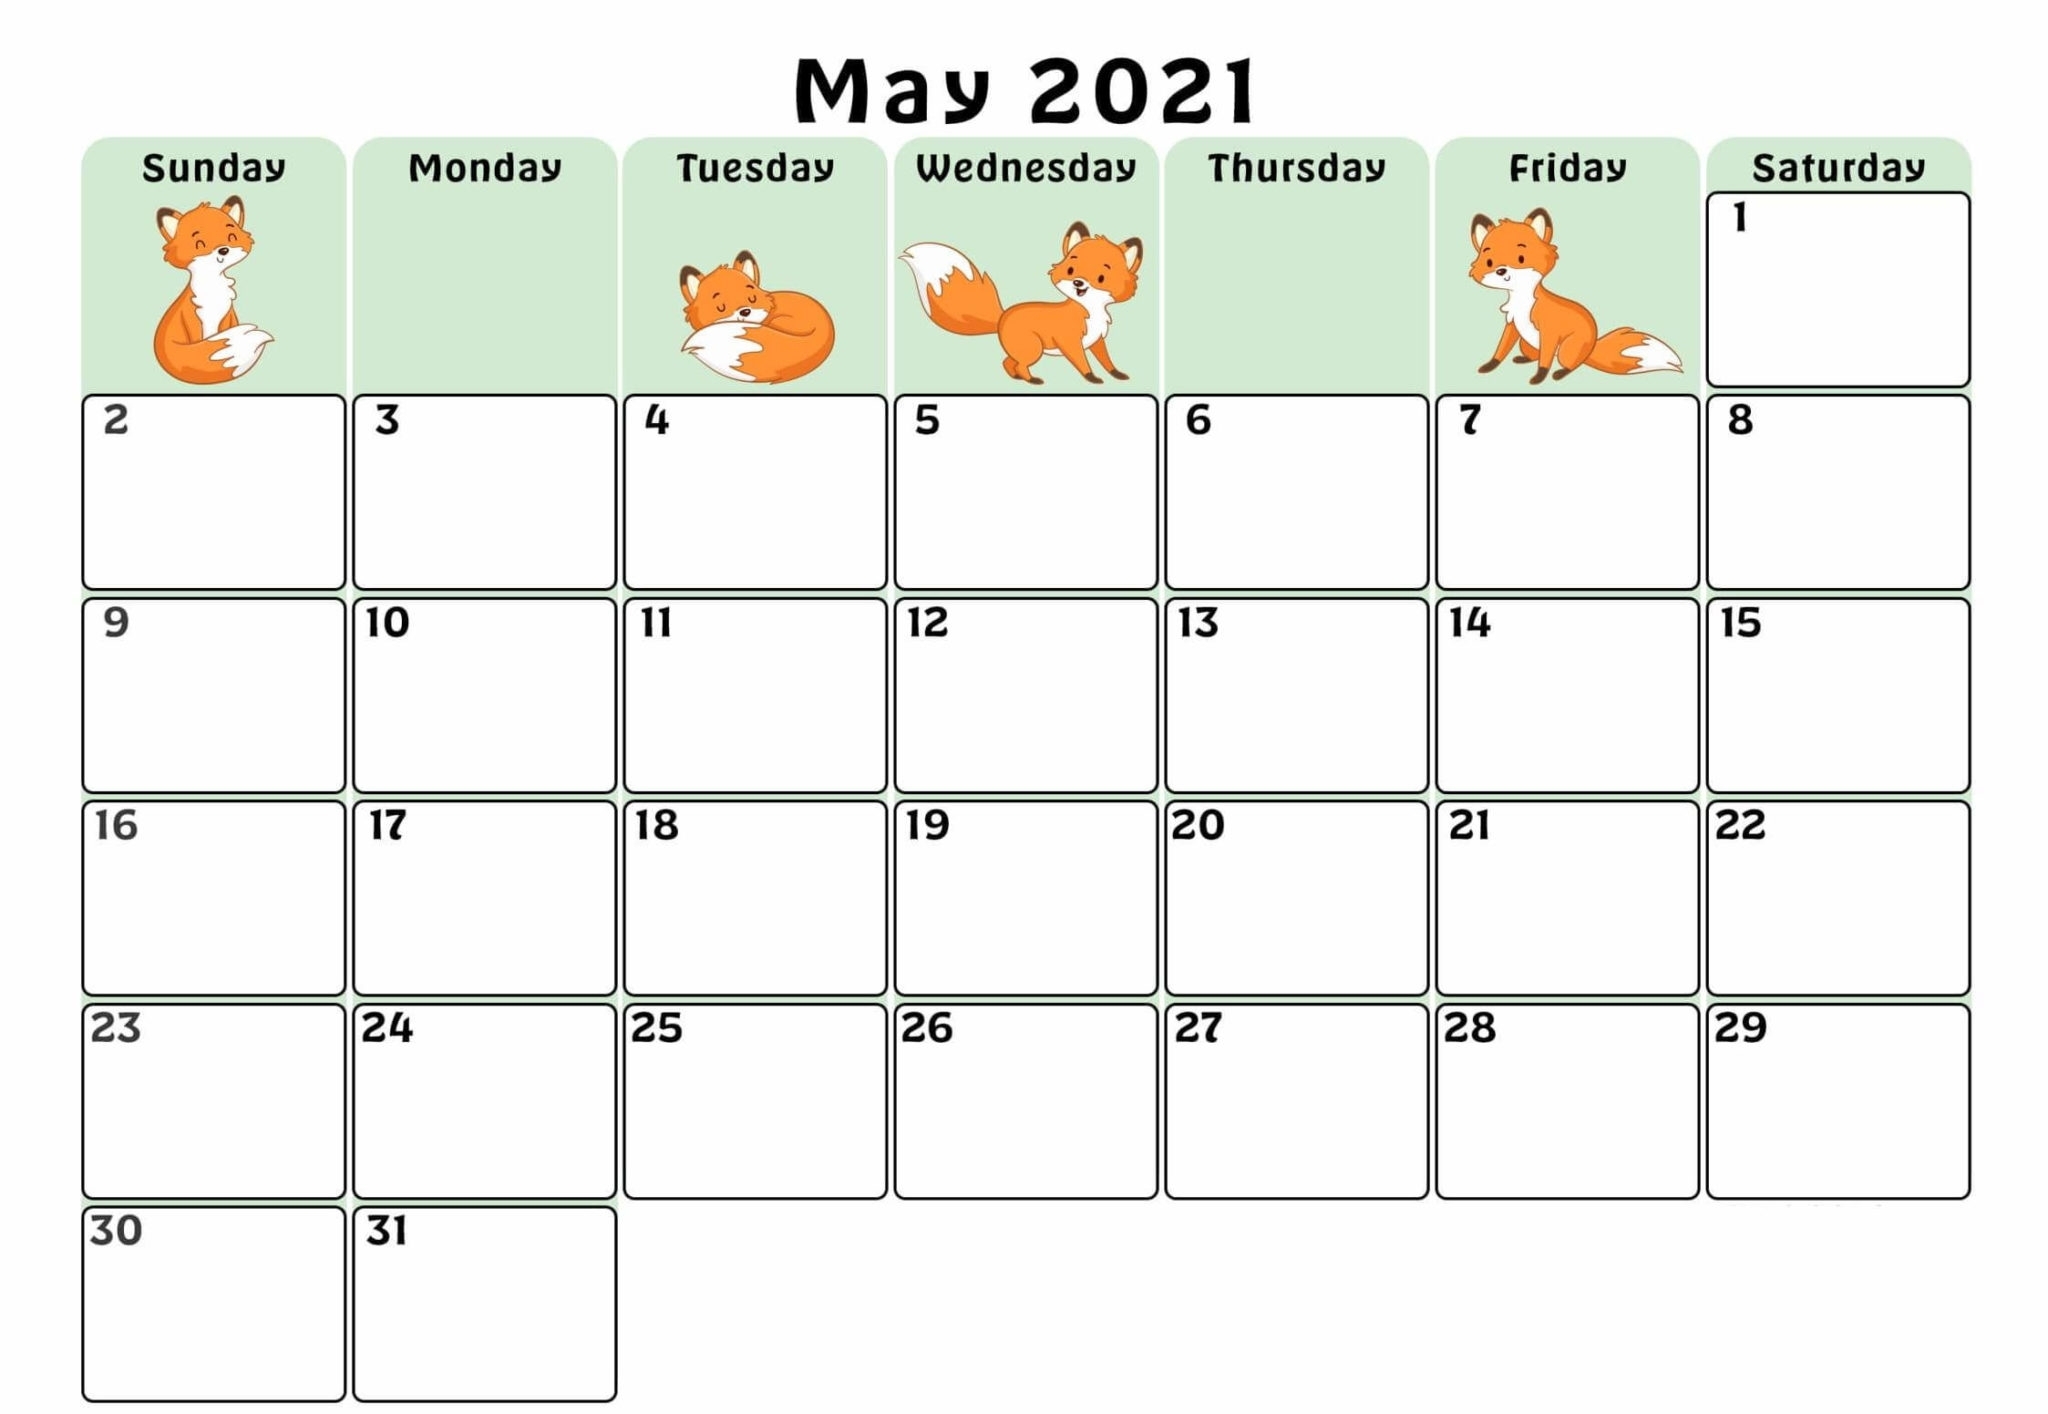 May 2021 Calendar Usa Template With Holidays - One